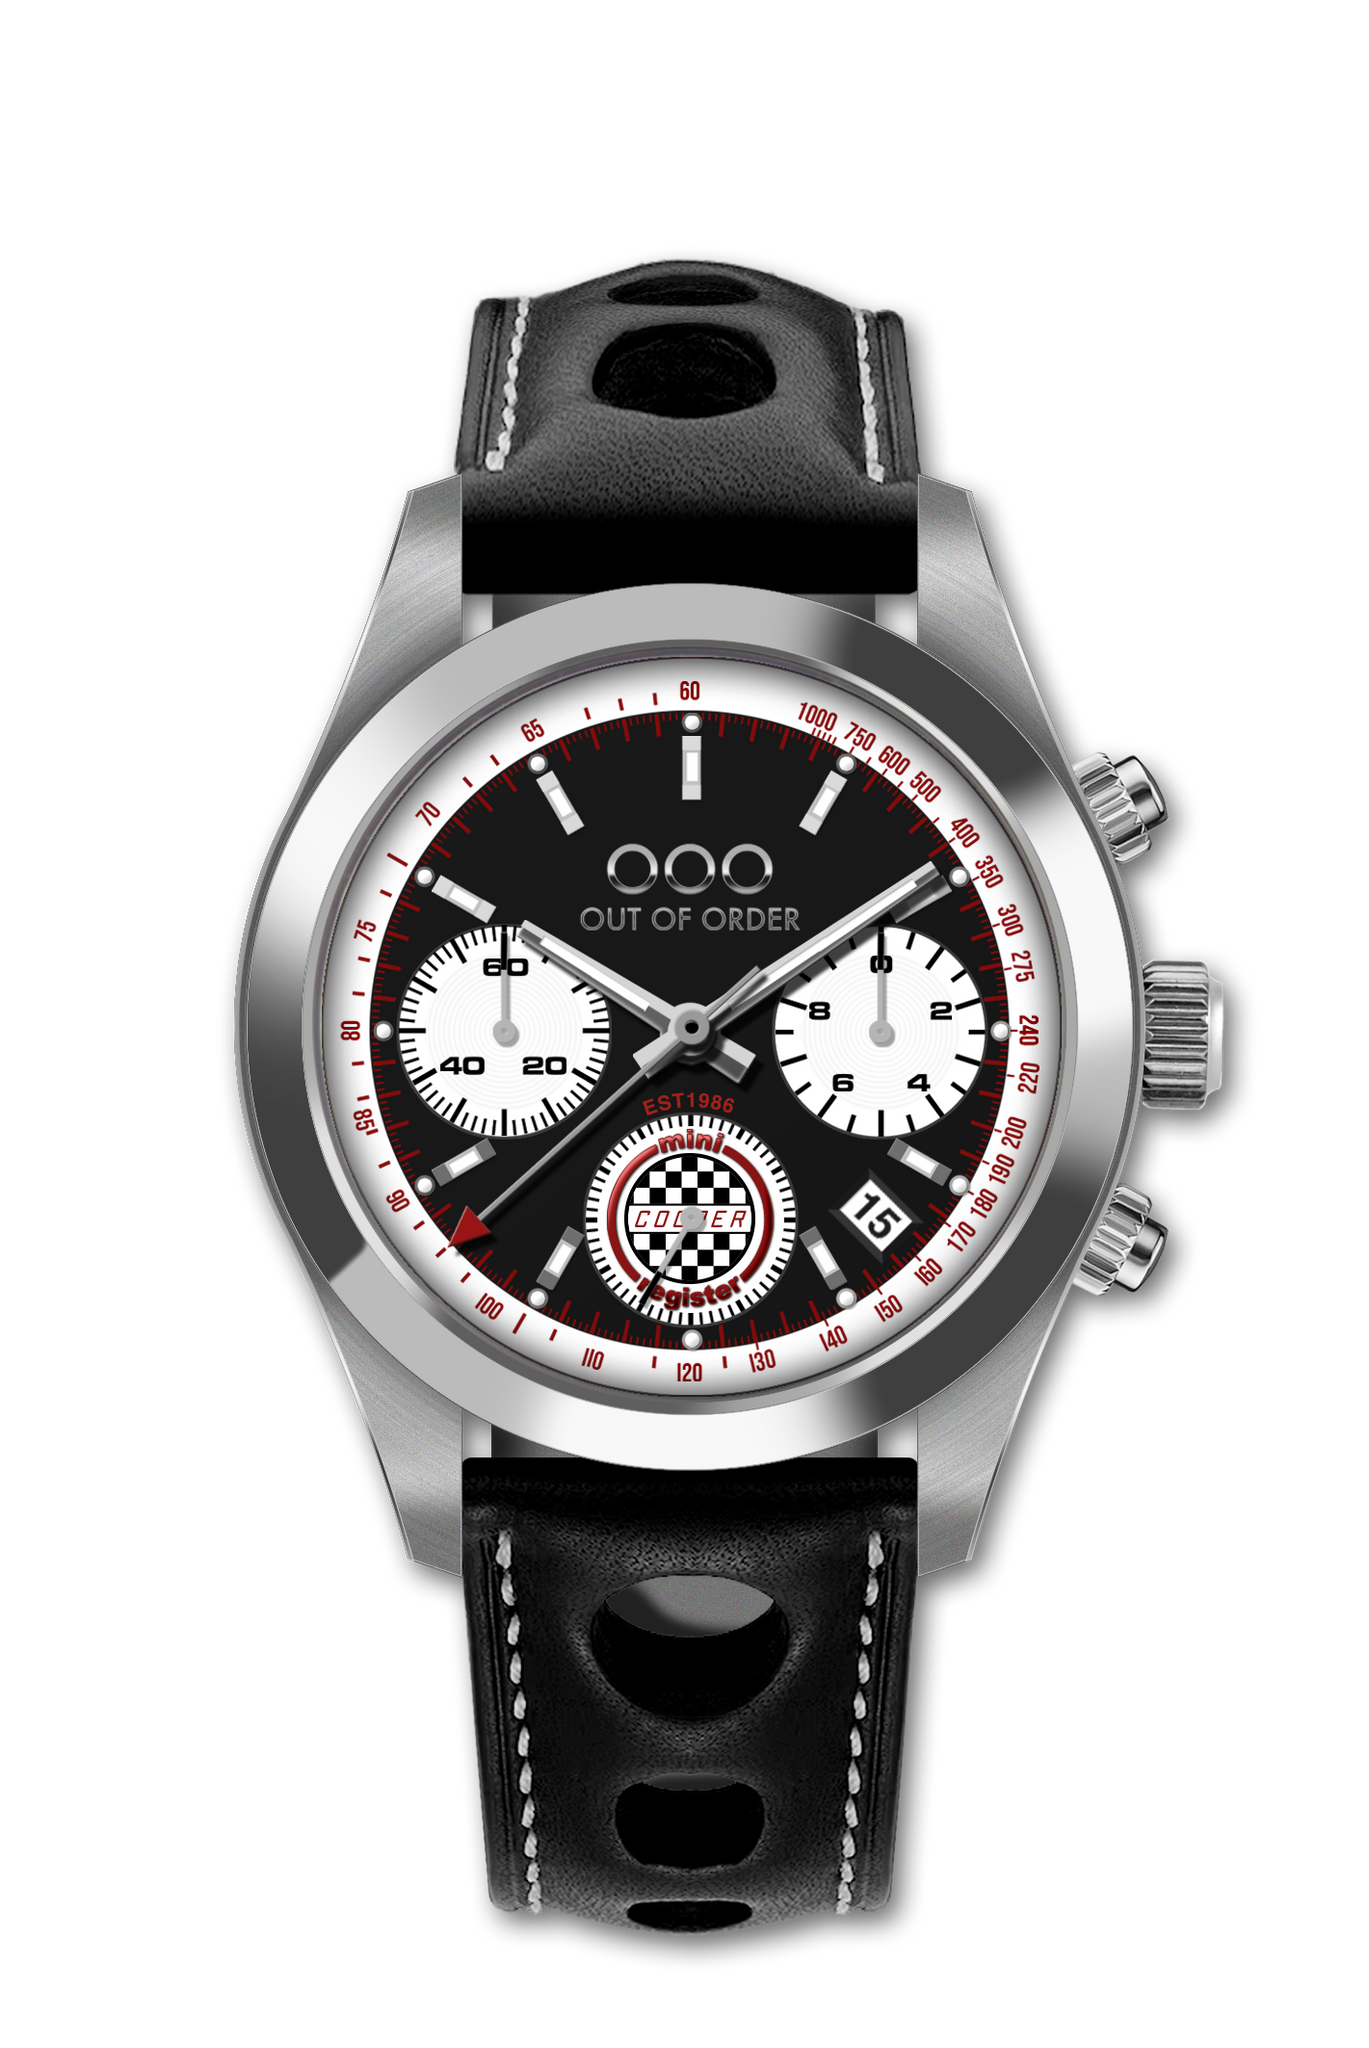 Mini Cooper Register Sporting Chronograph Limited Edition